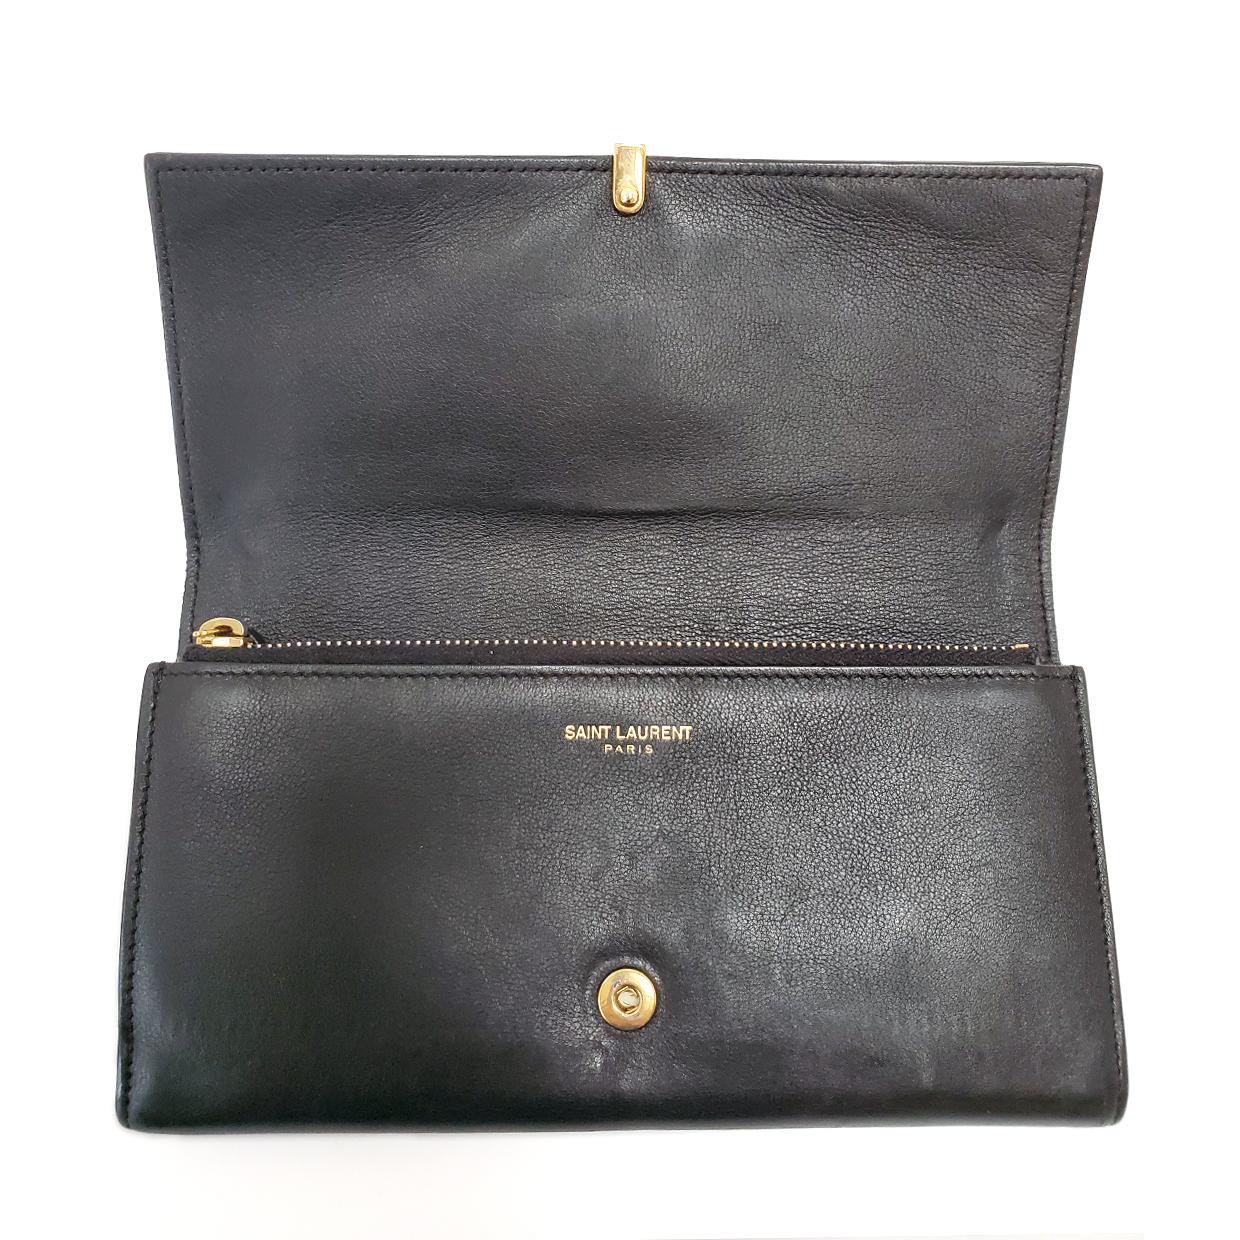 Yves Saint Laurent Classic Y Ligue Black Clutch Handbag In Good Condition For Sale In Columbia, MO